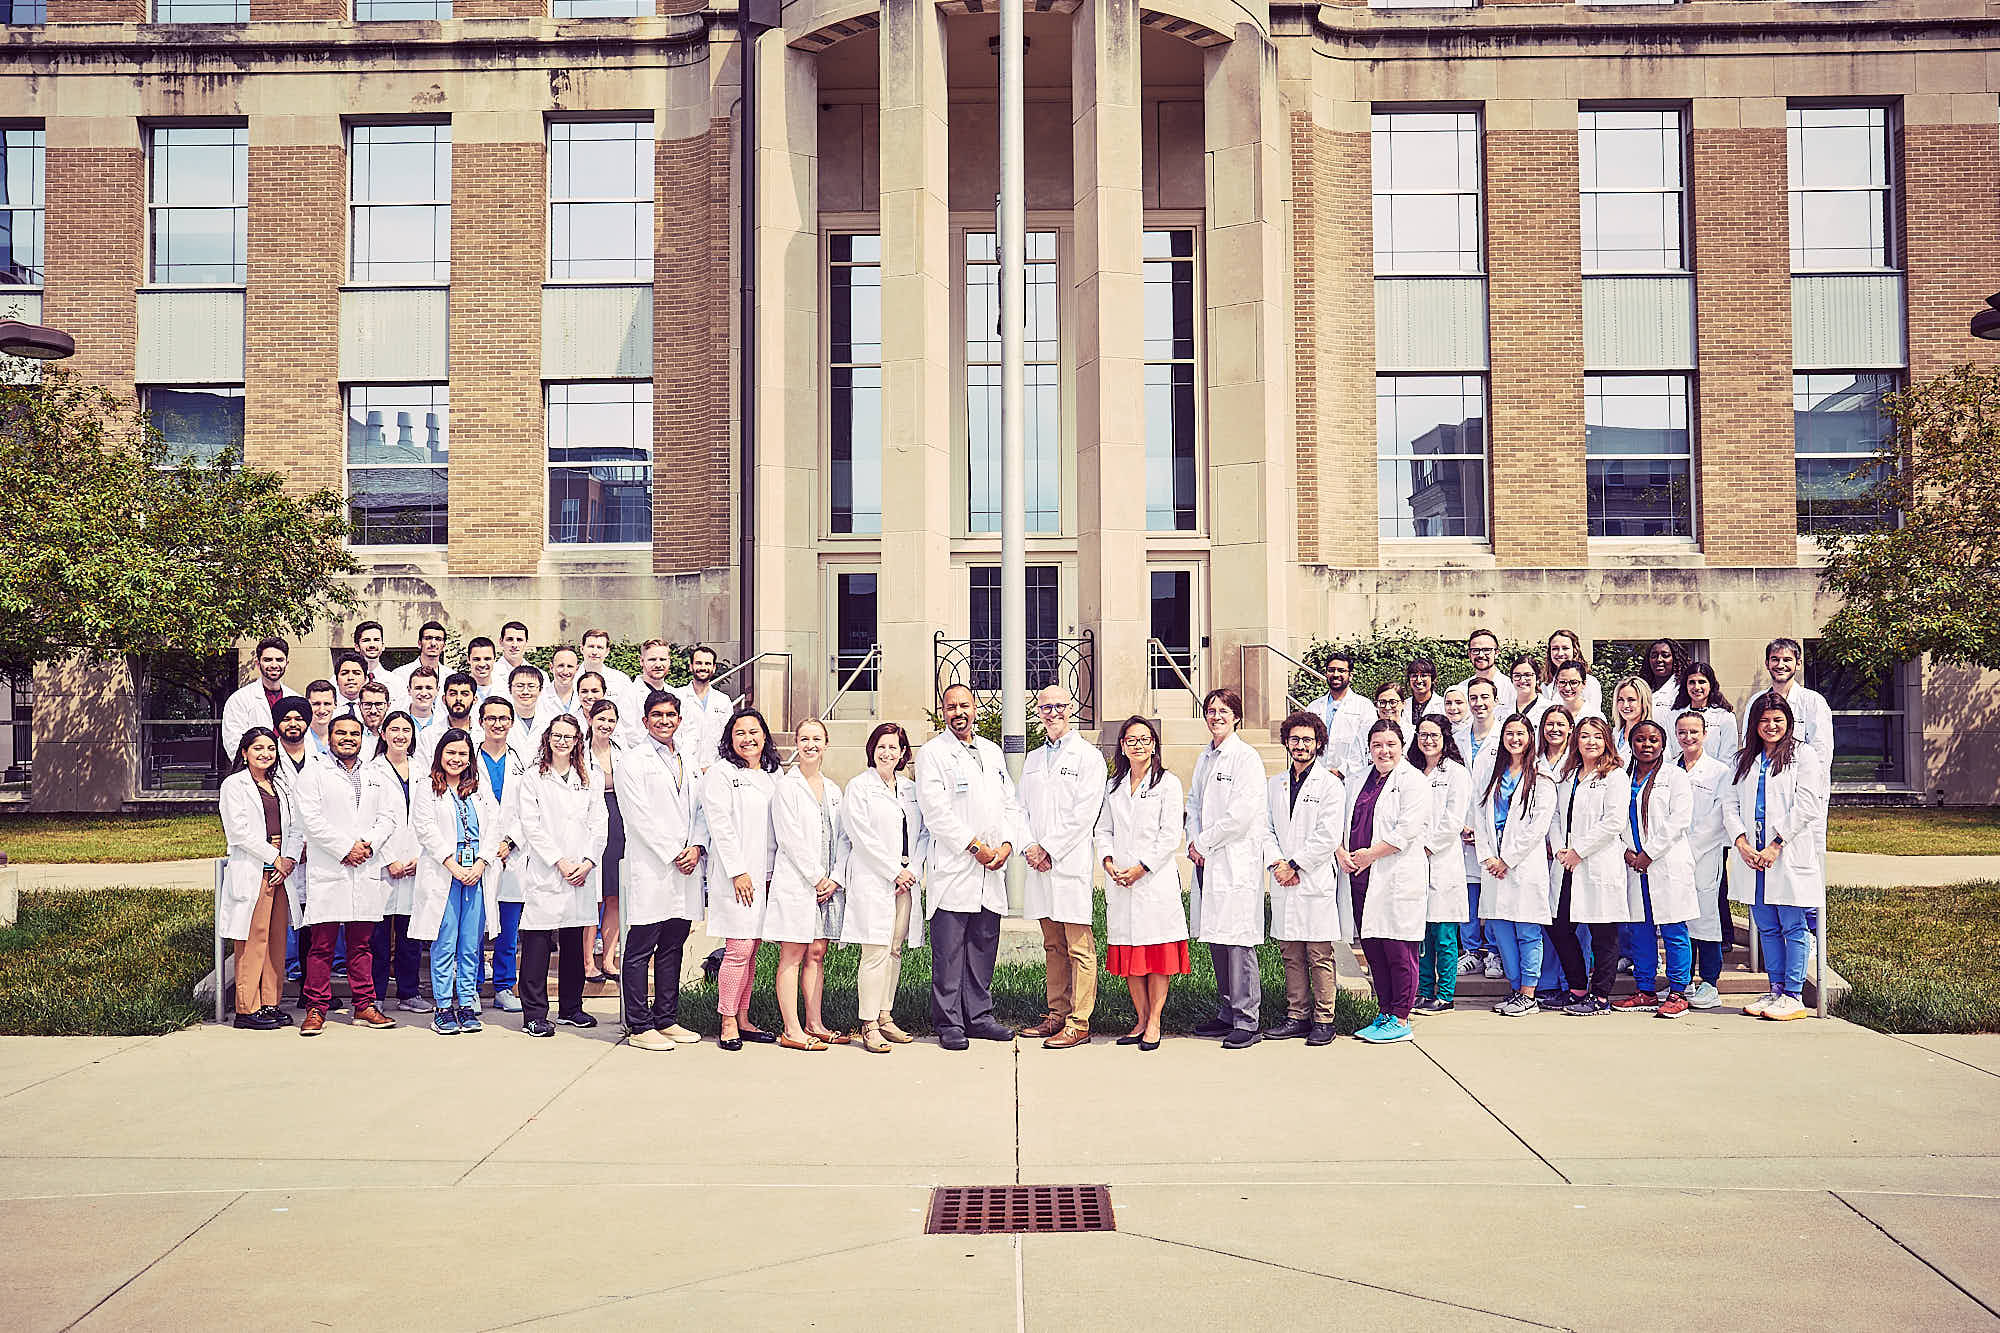 A group of internal medicine residents, chiefs, and leadership gathered in front of a building.